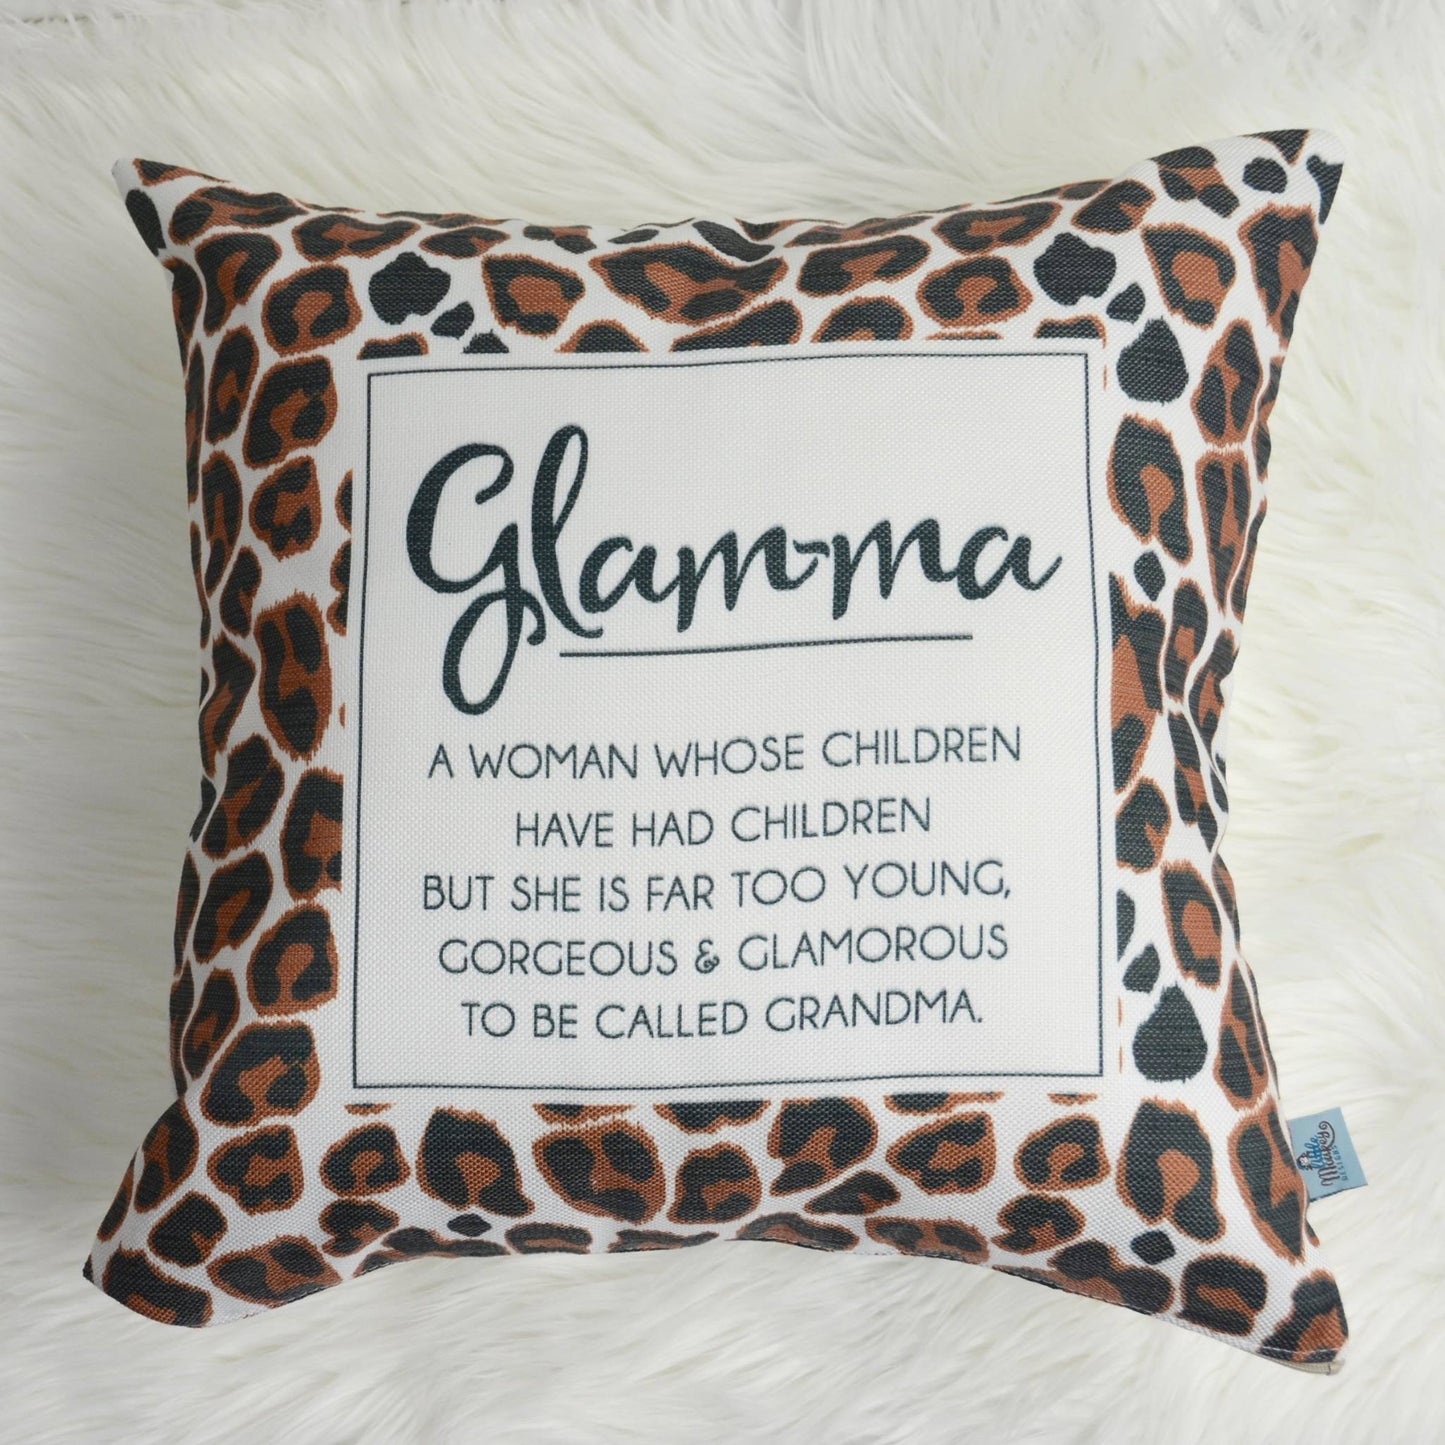 Glam-ma Pillow. Made in Canada.